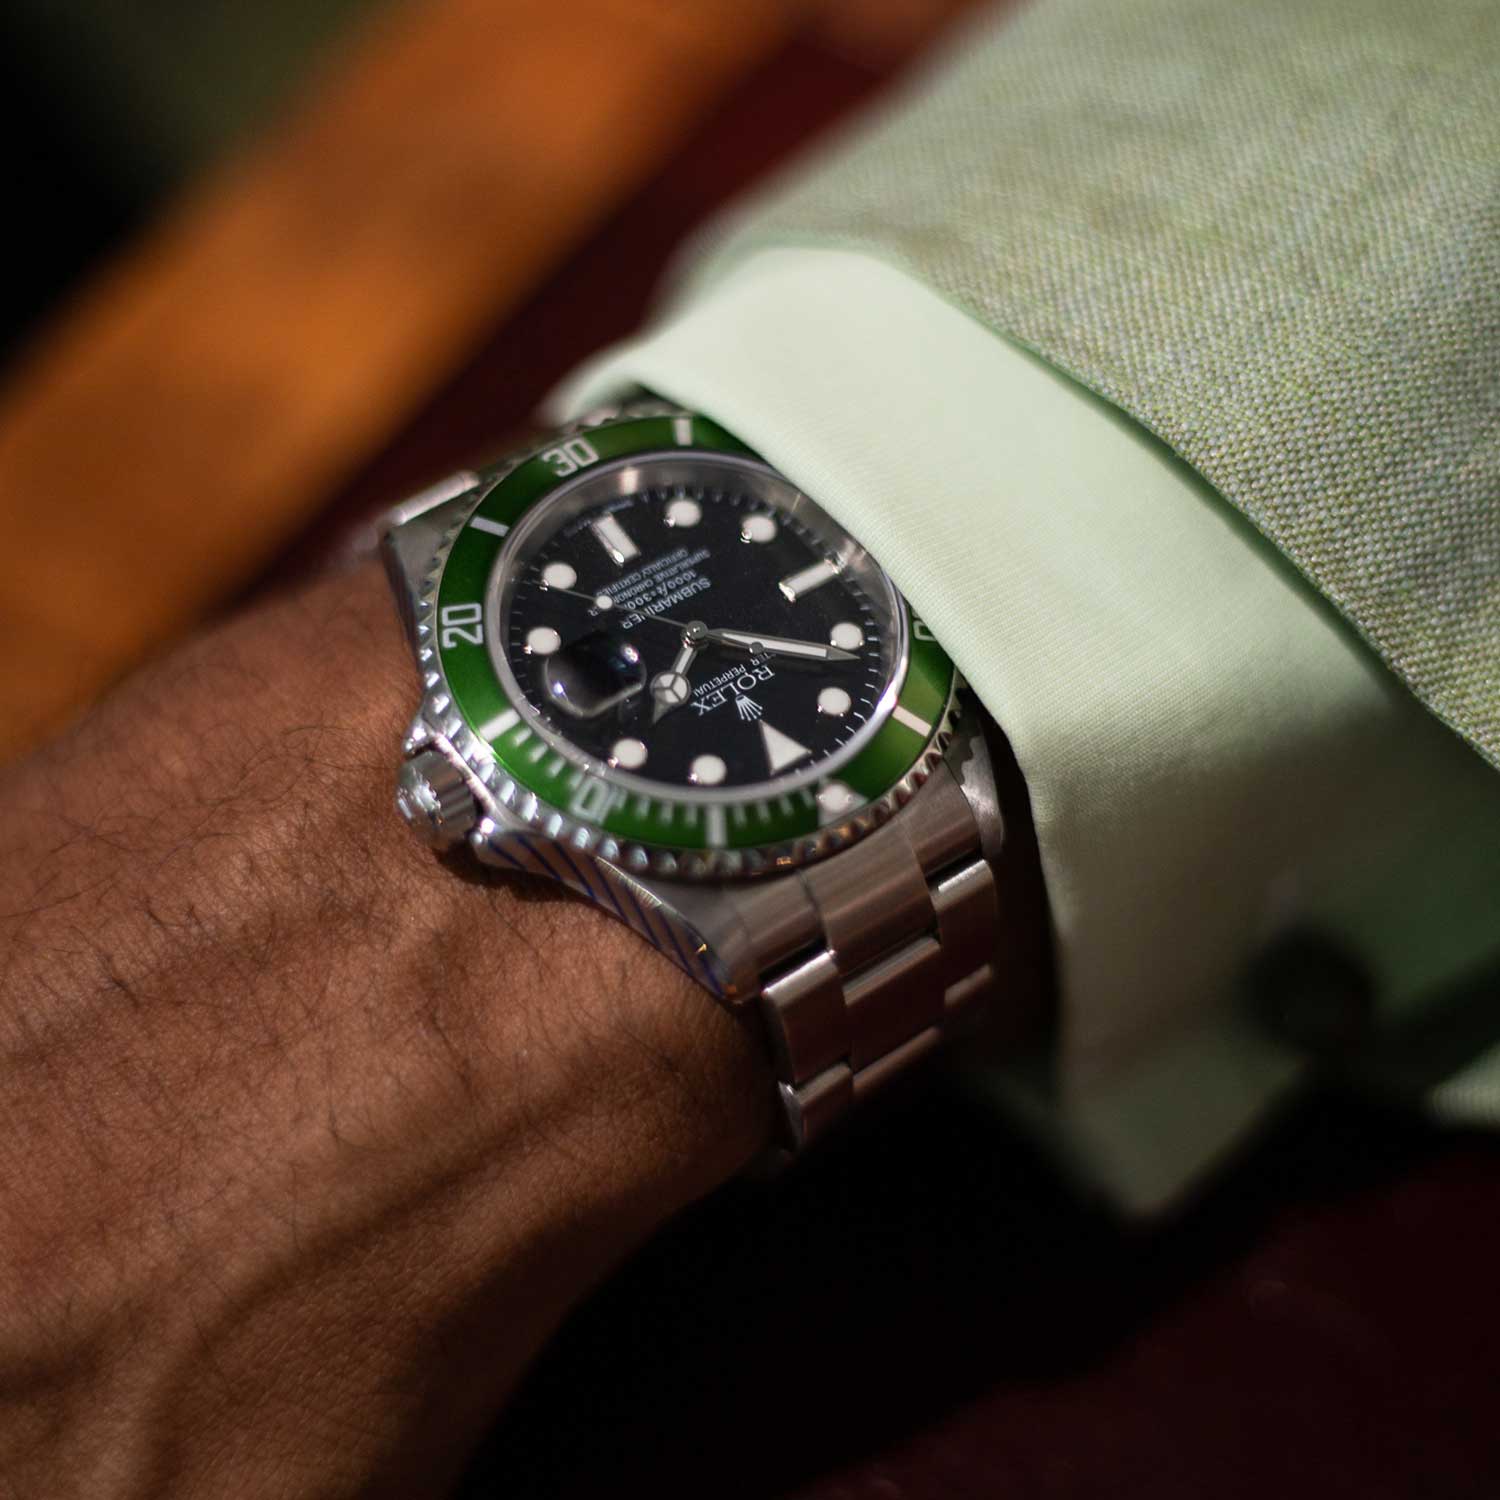 The ref. 16610LV was released to celebrate 50 years of the Submariner in 2003 and was soon nicknamed "Kermit" by the collecting community (Image: The Rake)